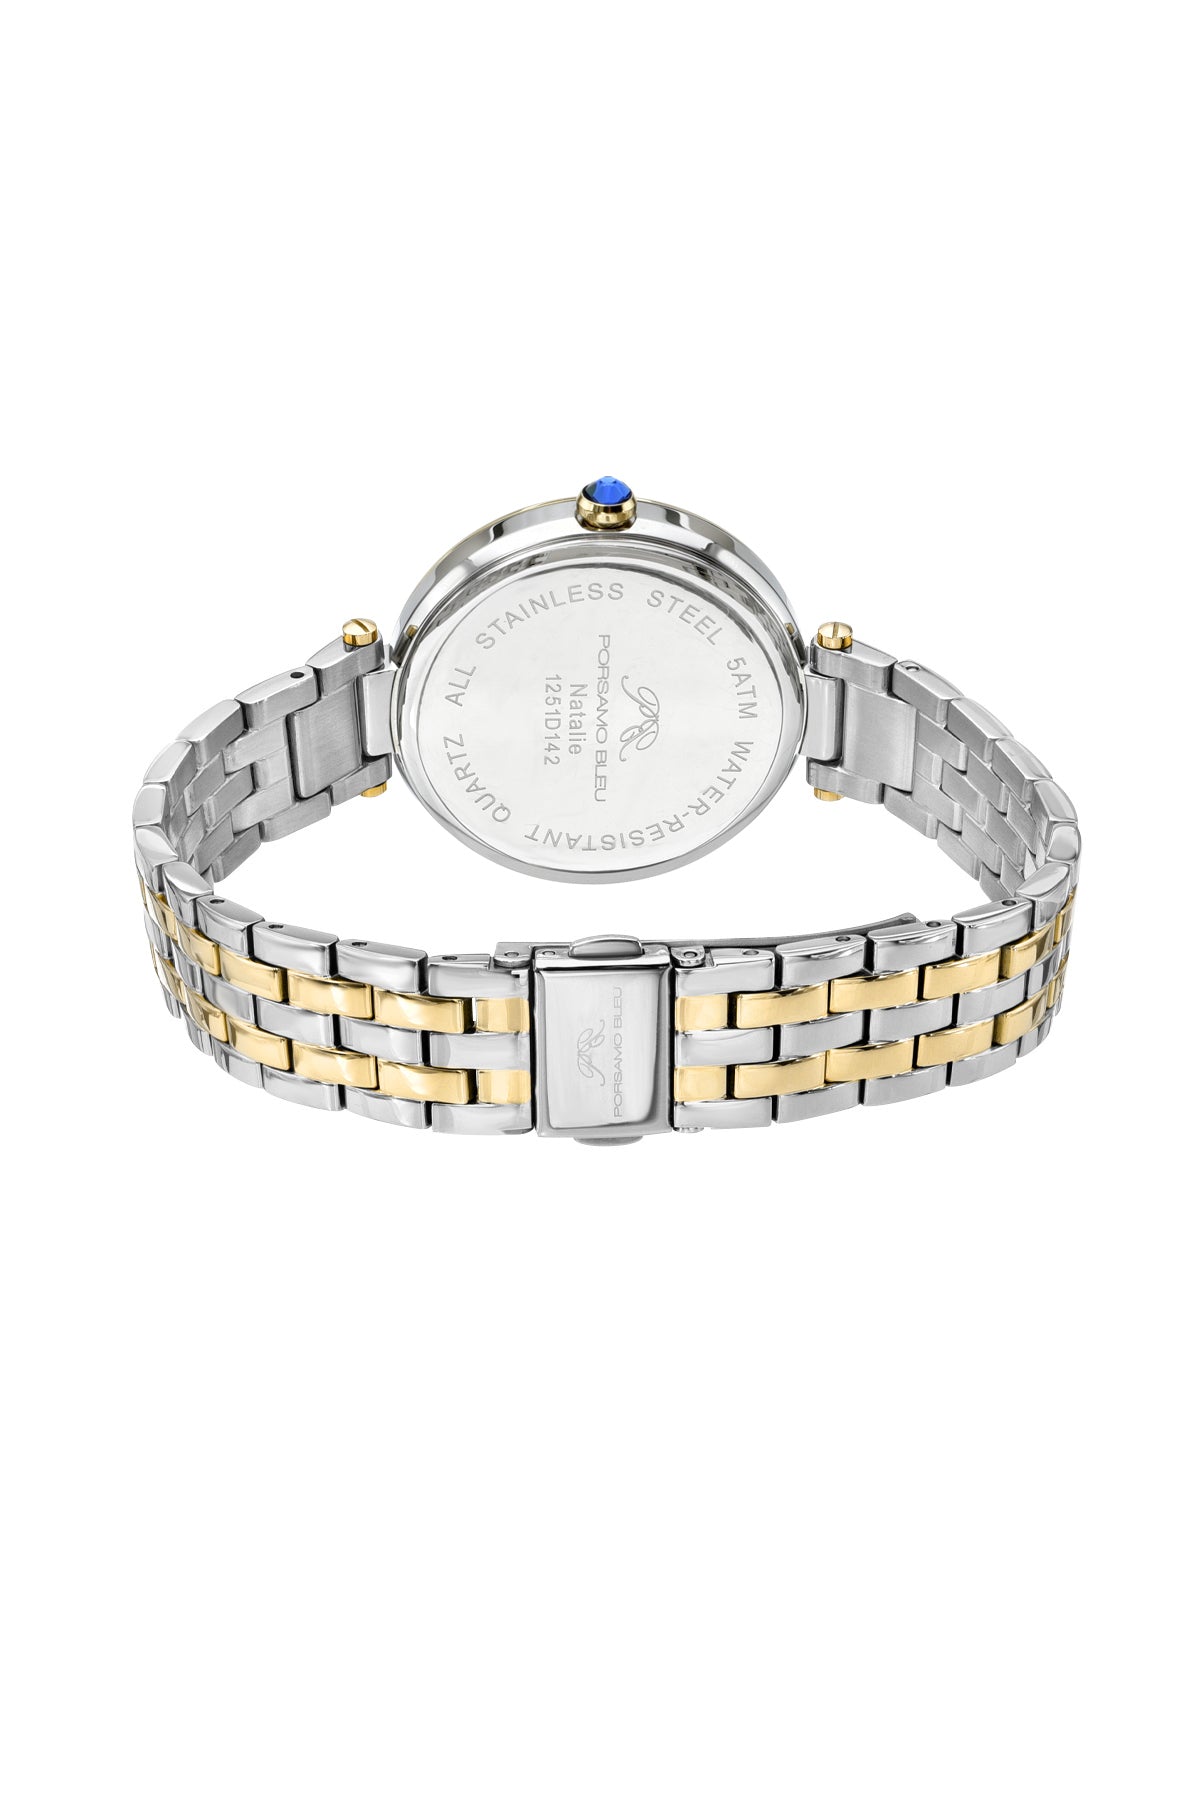 Porsamo Bleu Natalie Luxury Crystal Women's Stainless Steel Watch, With White Guilloche Dial, Two-Tone, 1251DNAS